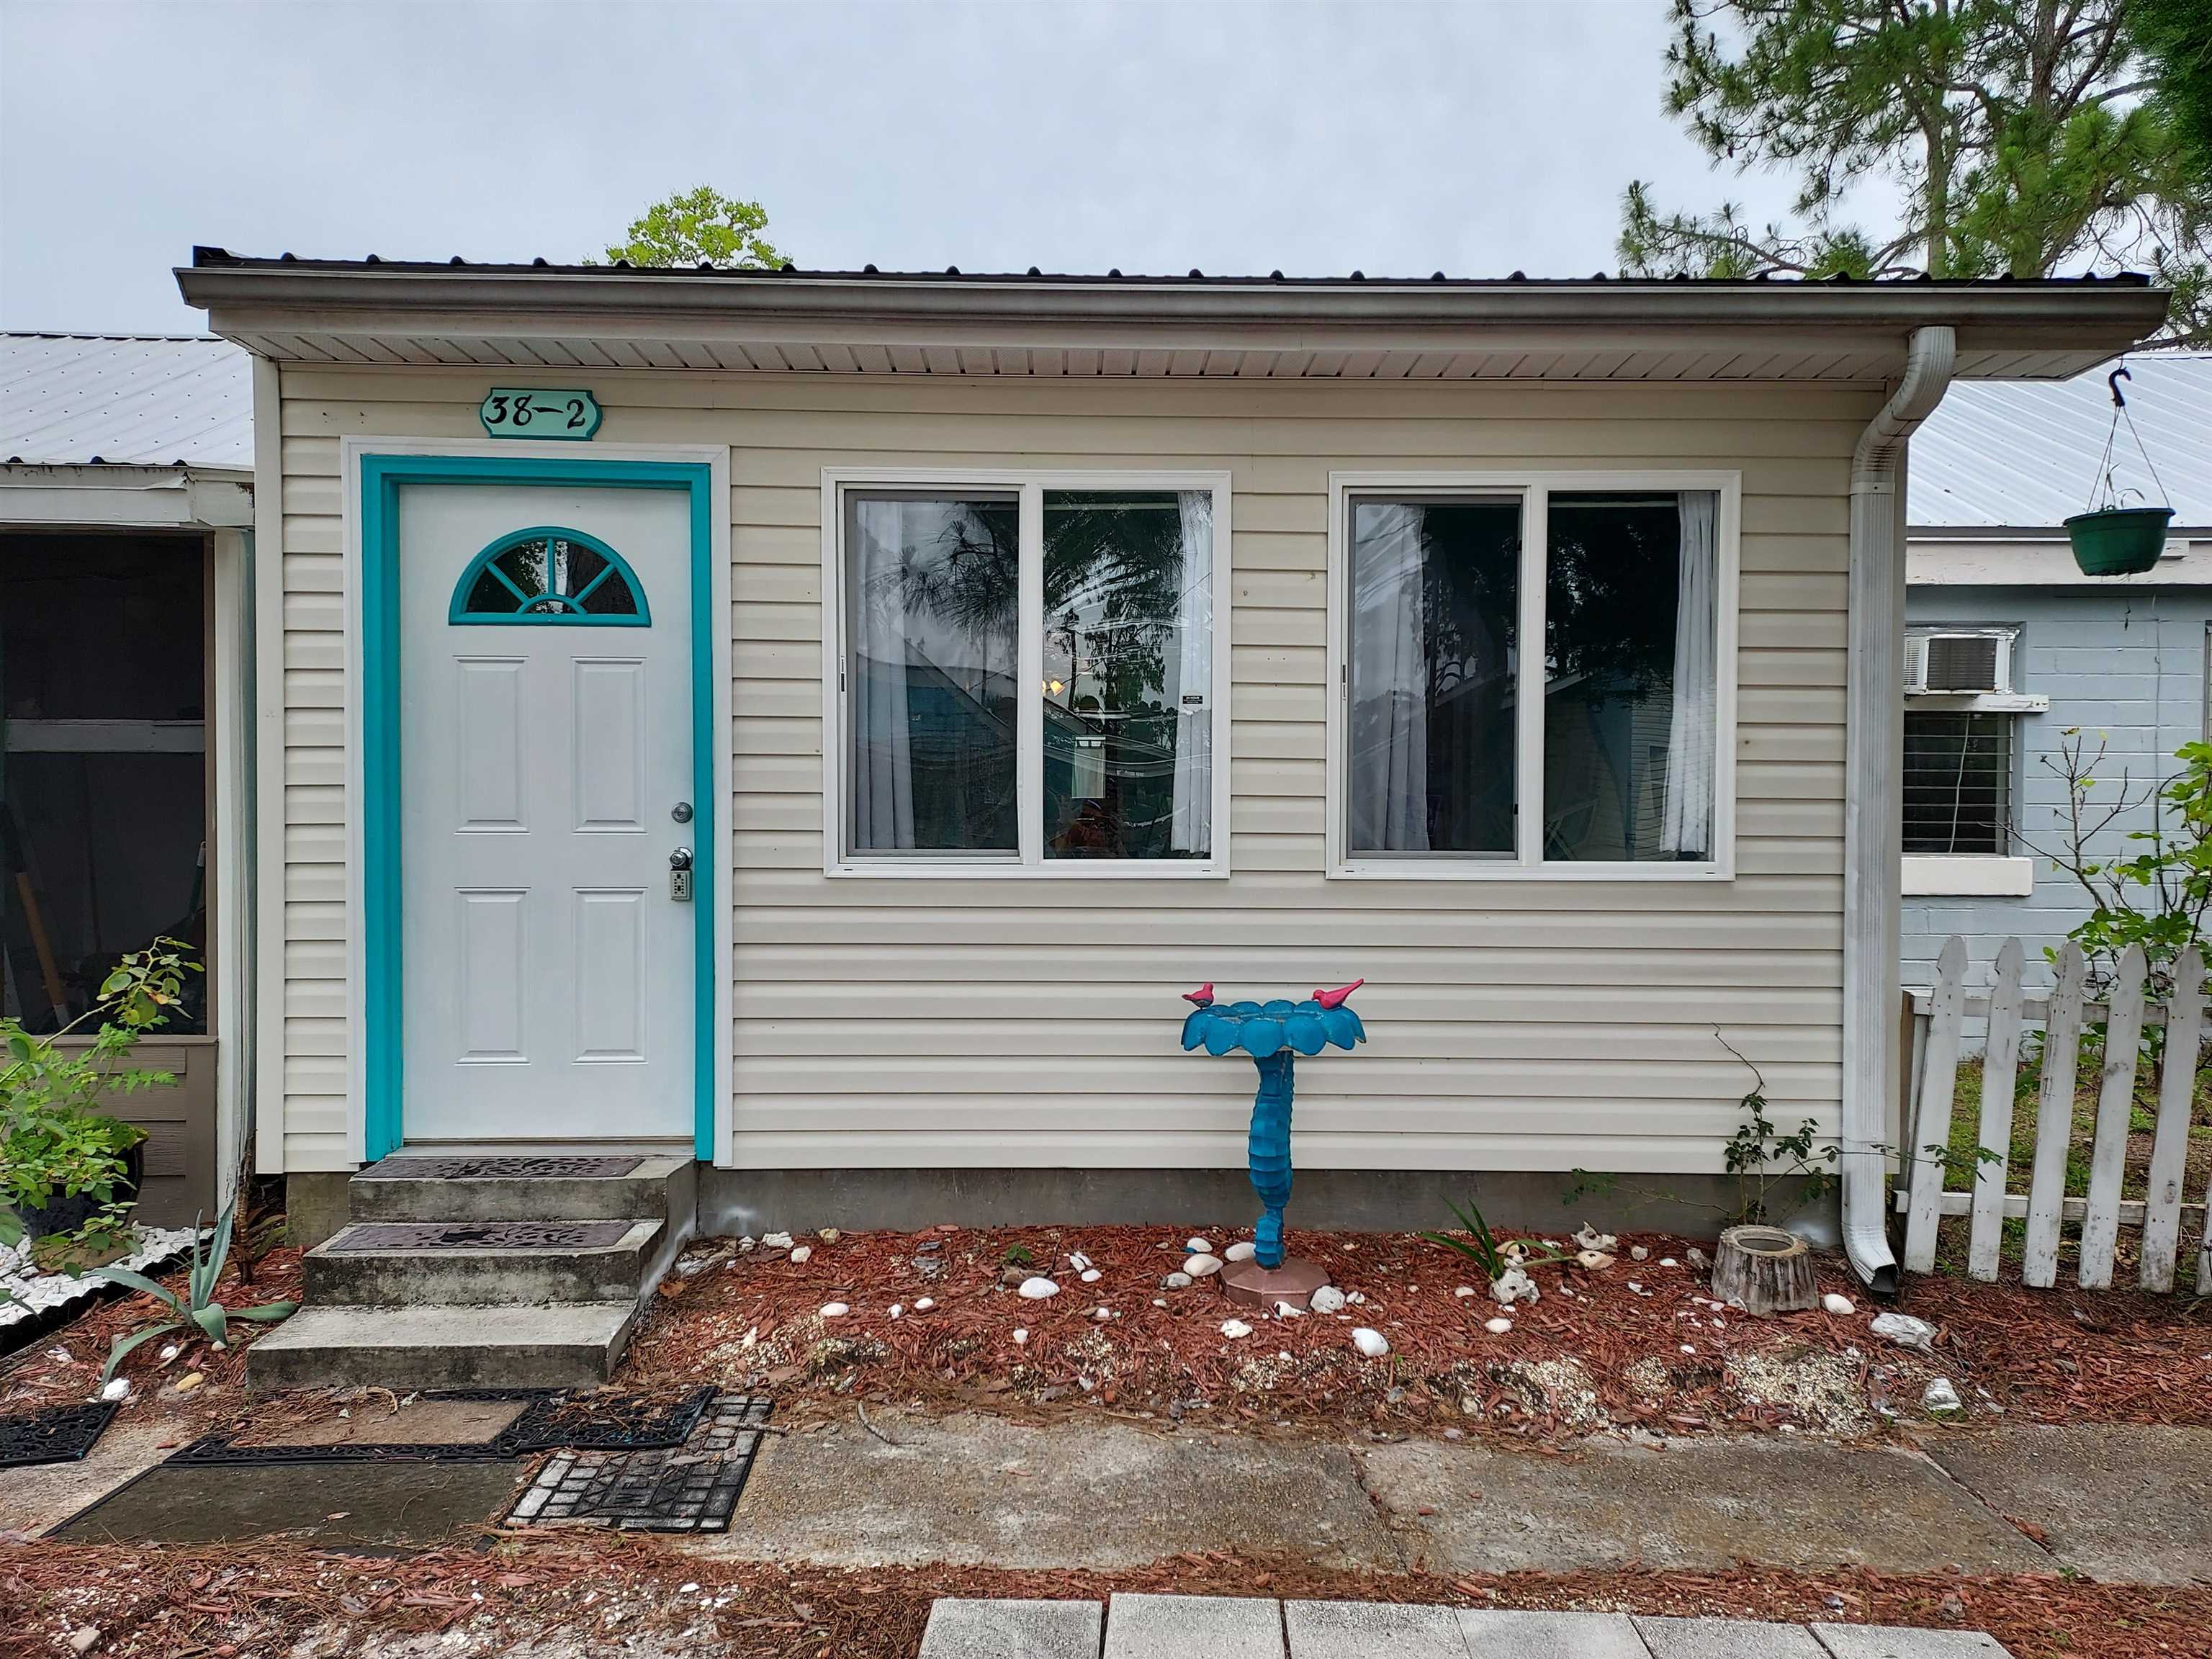 Precious Aqua Blue Beach Bungalow.  This 1 bedroom 1 bath bungalow has been completely renovated and updated. 2017 Roof, electrical, additions and plumbing. 2018 Kitchen, Appliances, Tile Floors, Paint, Hot Water Heater, Toilet and Shower Tile. This unit has a built in Laundry Closet and additional storage closet.  There is 10x9.5 Bonus Room that could be used as a bunk room, office or quiet sitting room.  Located in the quiet fishing town of Lanark Village.  This small eclectic community is great for a retirement home, vacation home, fishing villa, weekend home, primary residence or as an investment rental property. There are no HOA fees.  The local boat launch is less than 1/2 mile away and White Sandy Carrabelle Beach is a 10 minute drive.  This Forgotten Coast destination is a short 1 hour commute to Tallahassee.